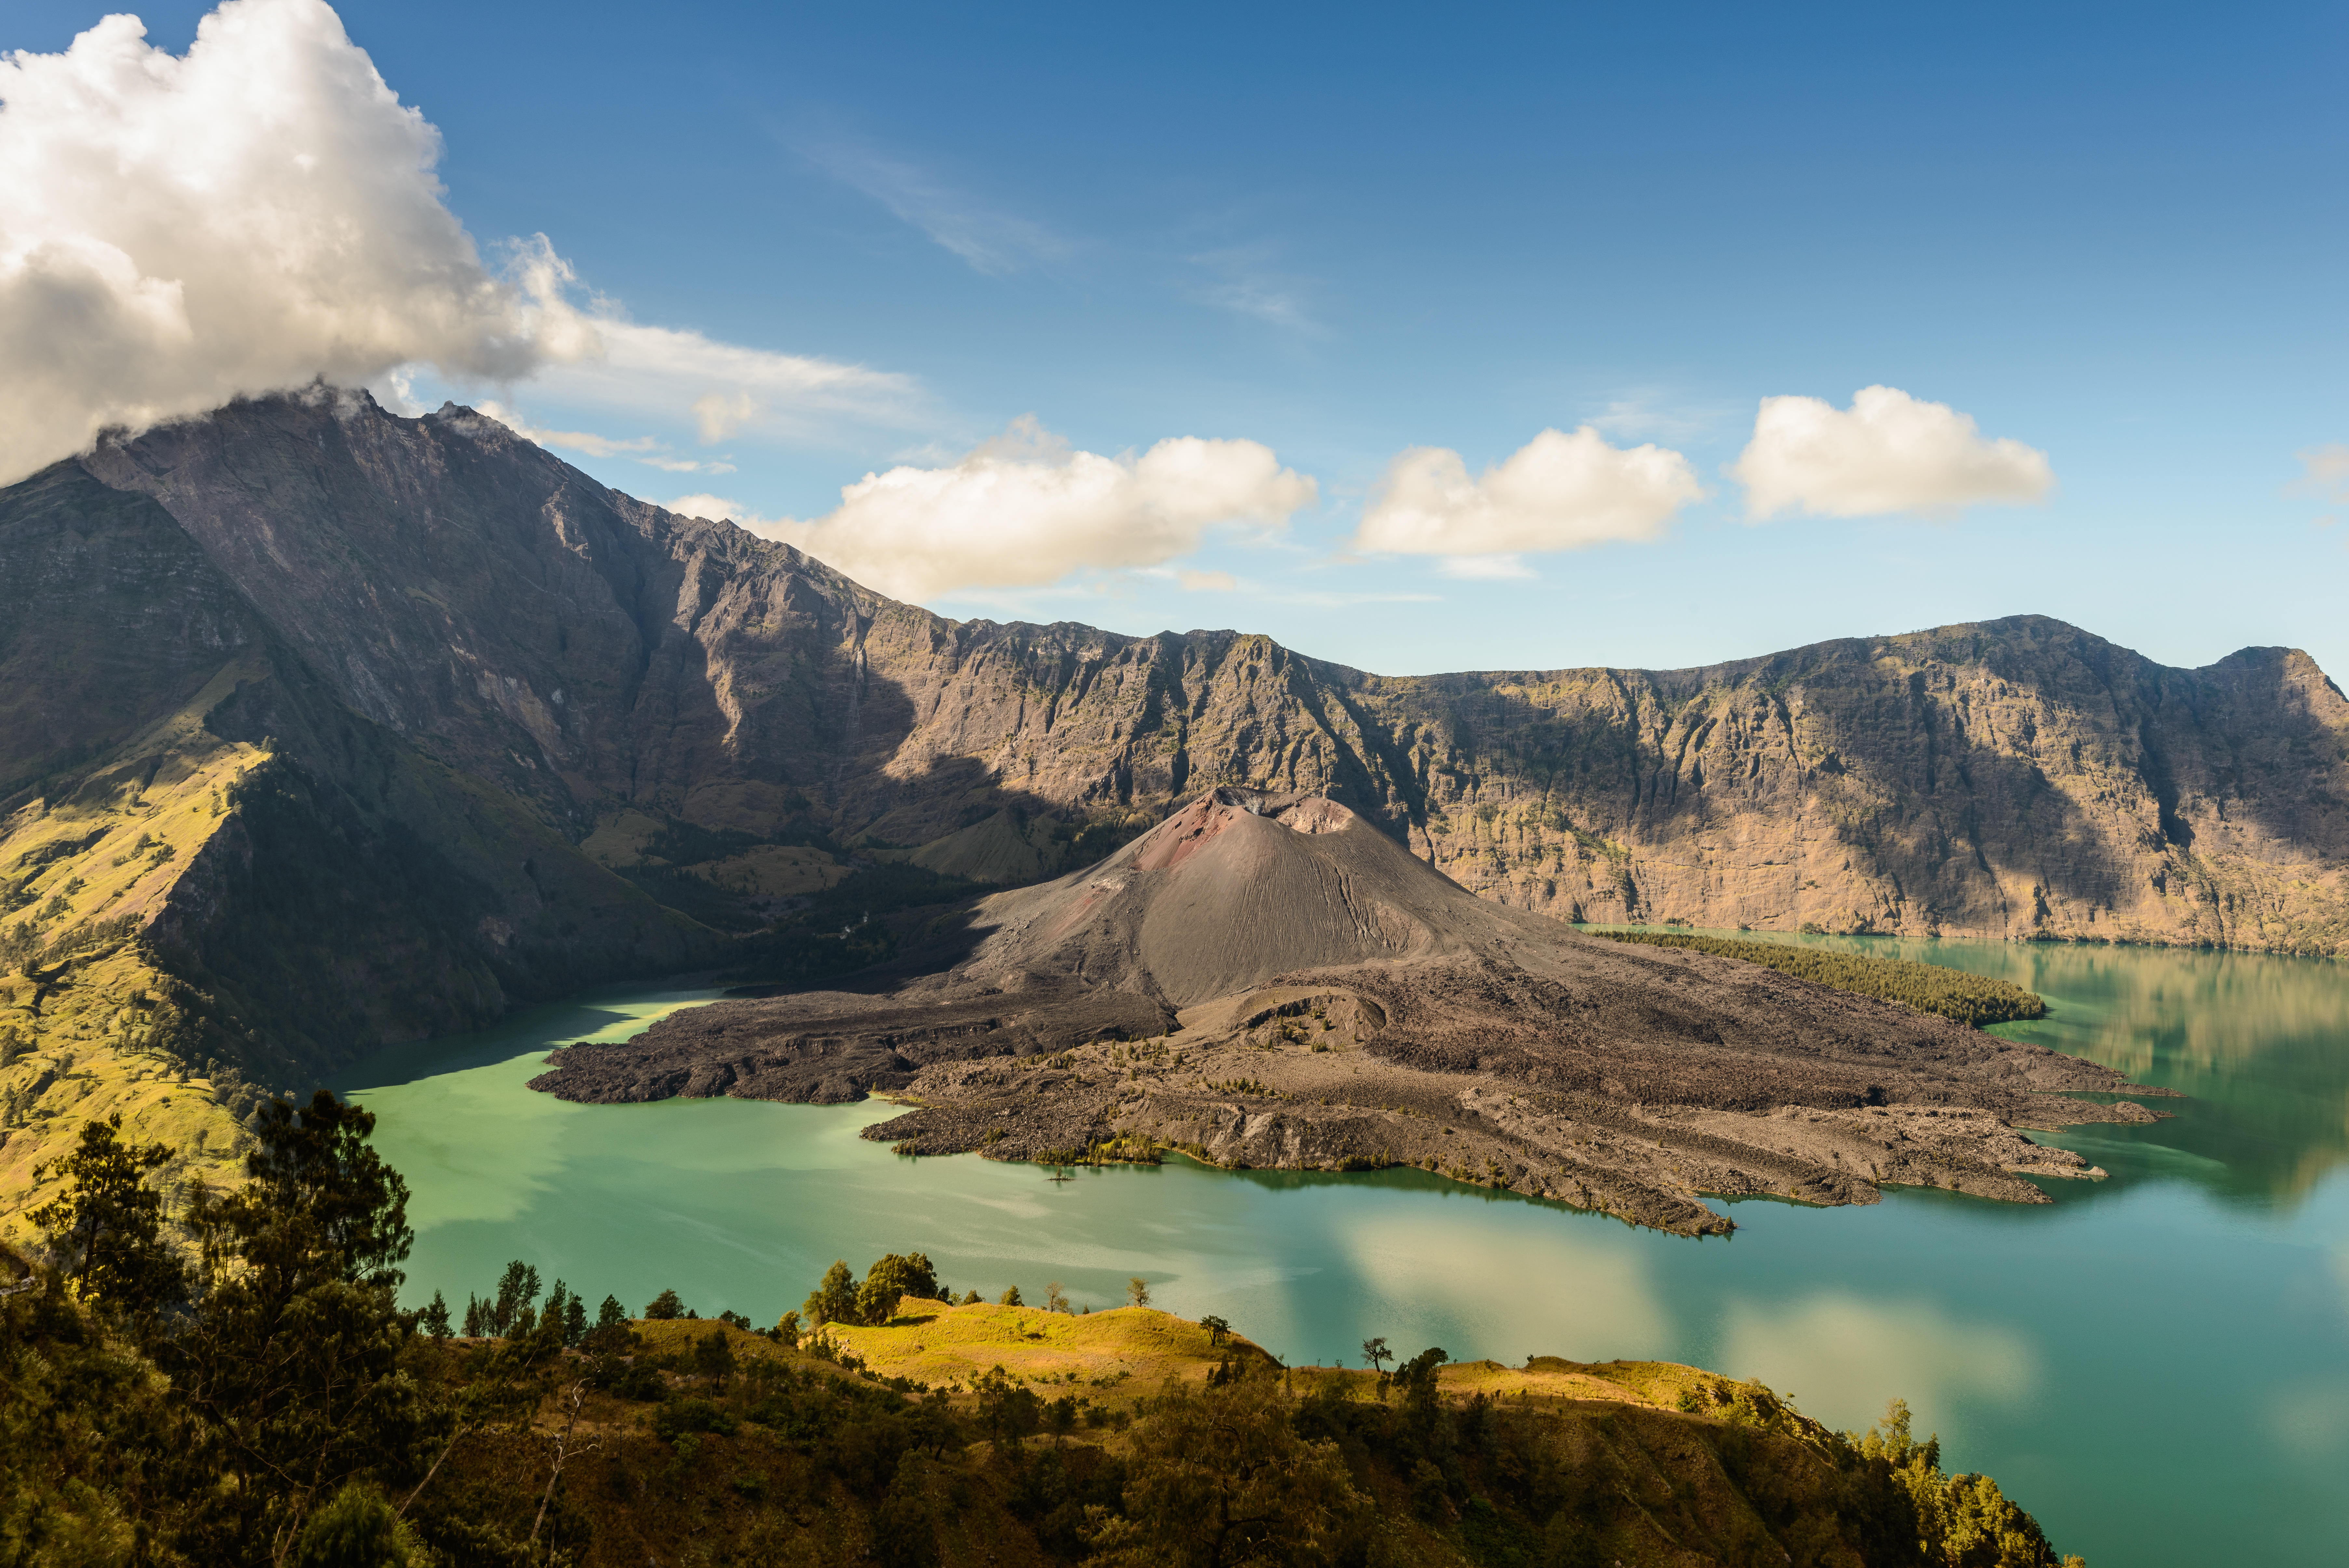 The Most Beautiful Places to Visit in Indonesia